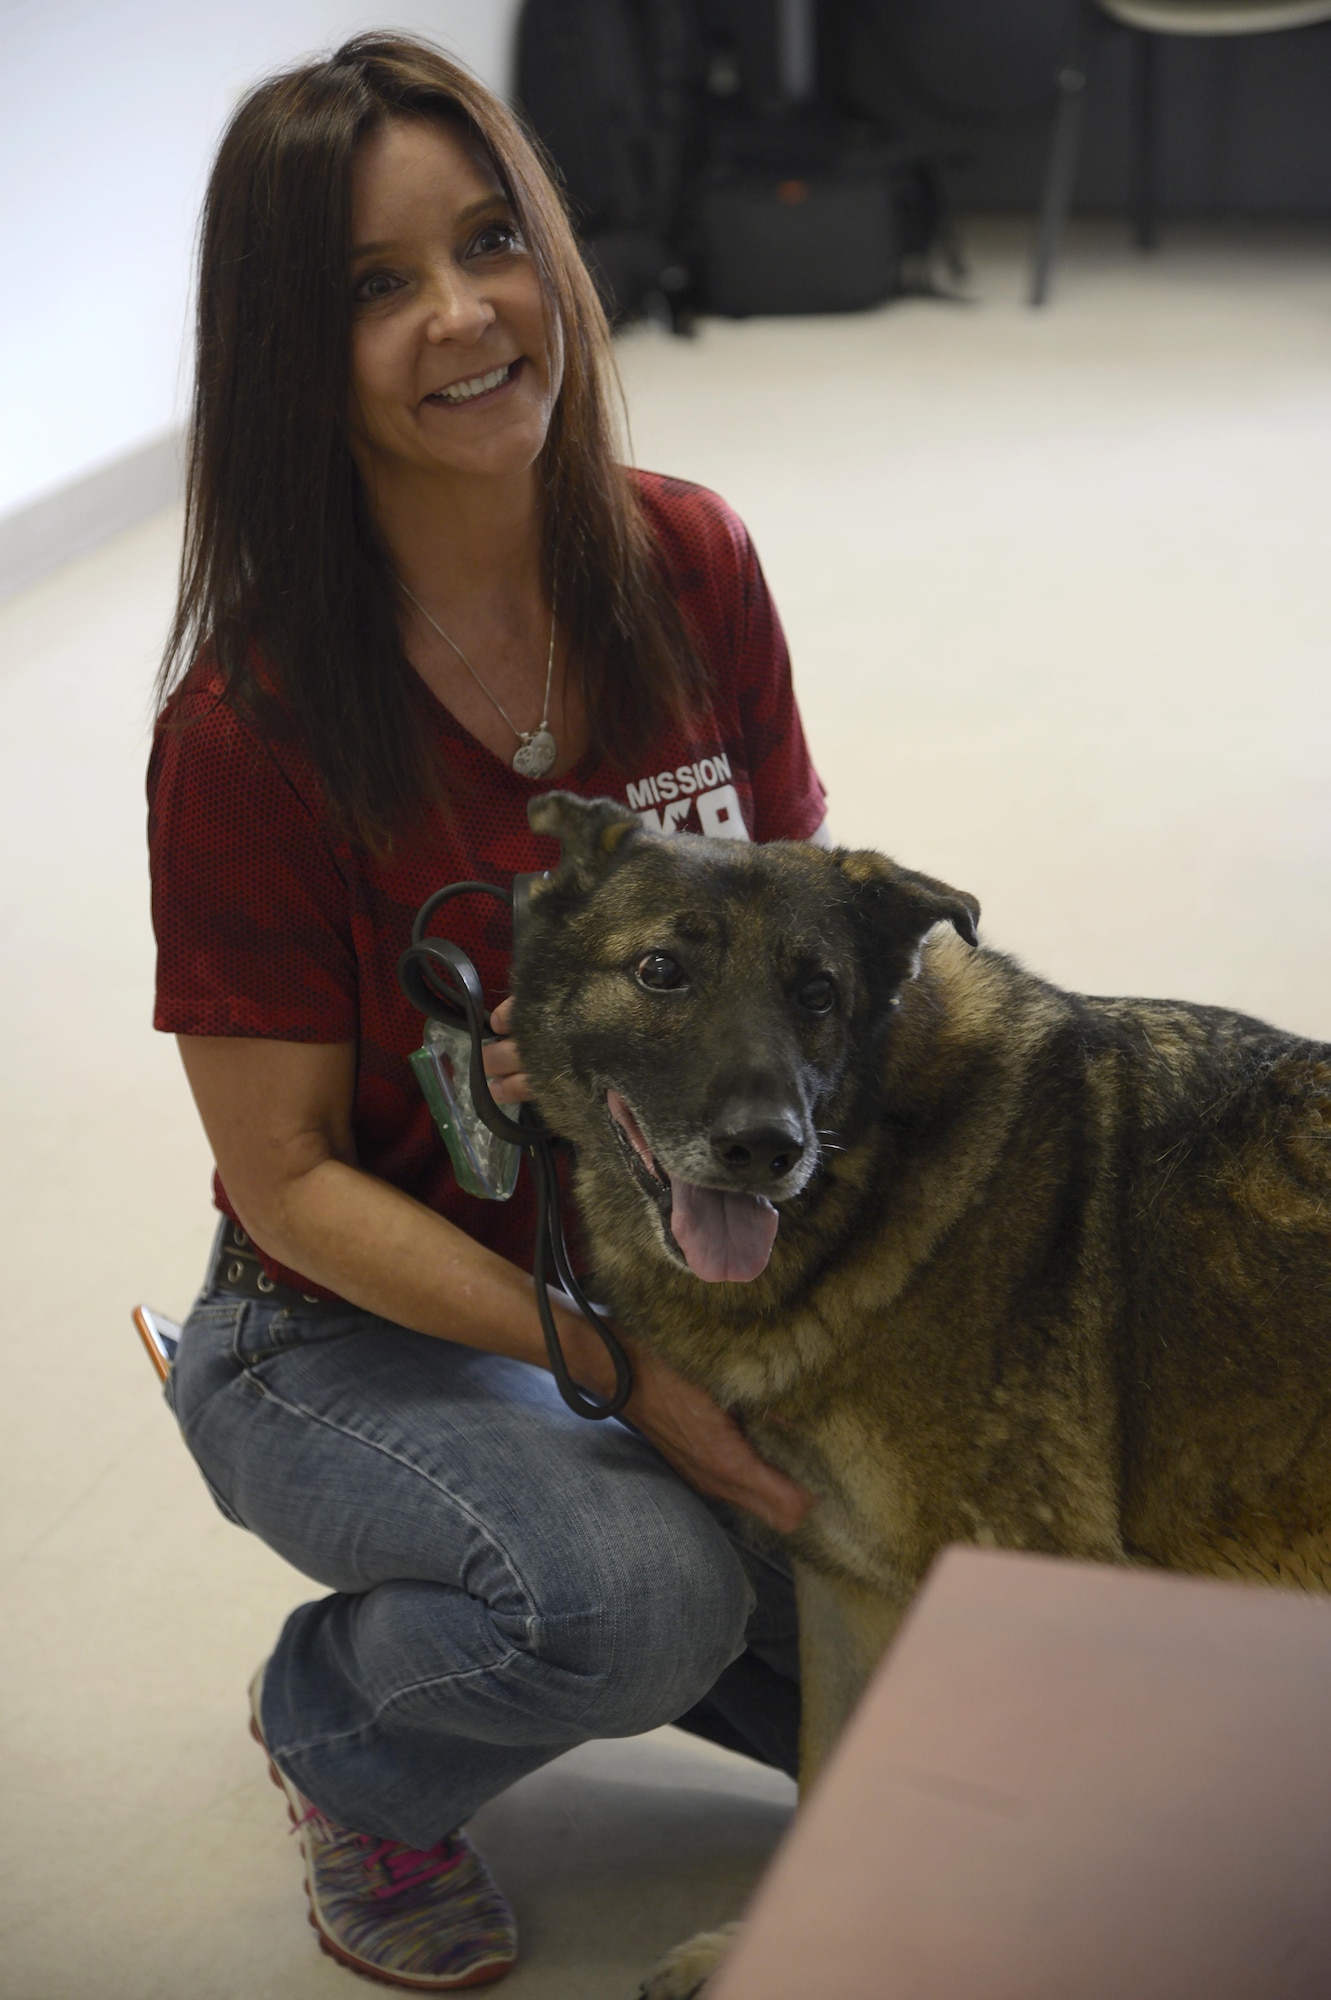 Kristen Maurer, president of Mission K9 Rescue, pauses for a photo with military working dog Zoran at MacDill Air Force Base, Fla., March 31, 2017. Maurer took Zoran to Mission K9 Rescue to live out his retirement after seven years of service to the U.S. Air Force. (U.S. Air Force photo by Senior Airman Tori Schultz)